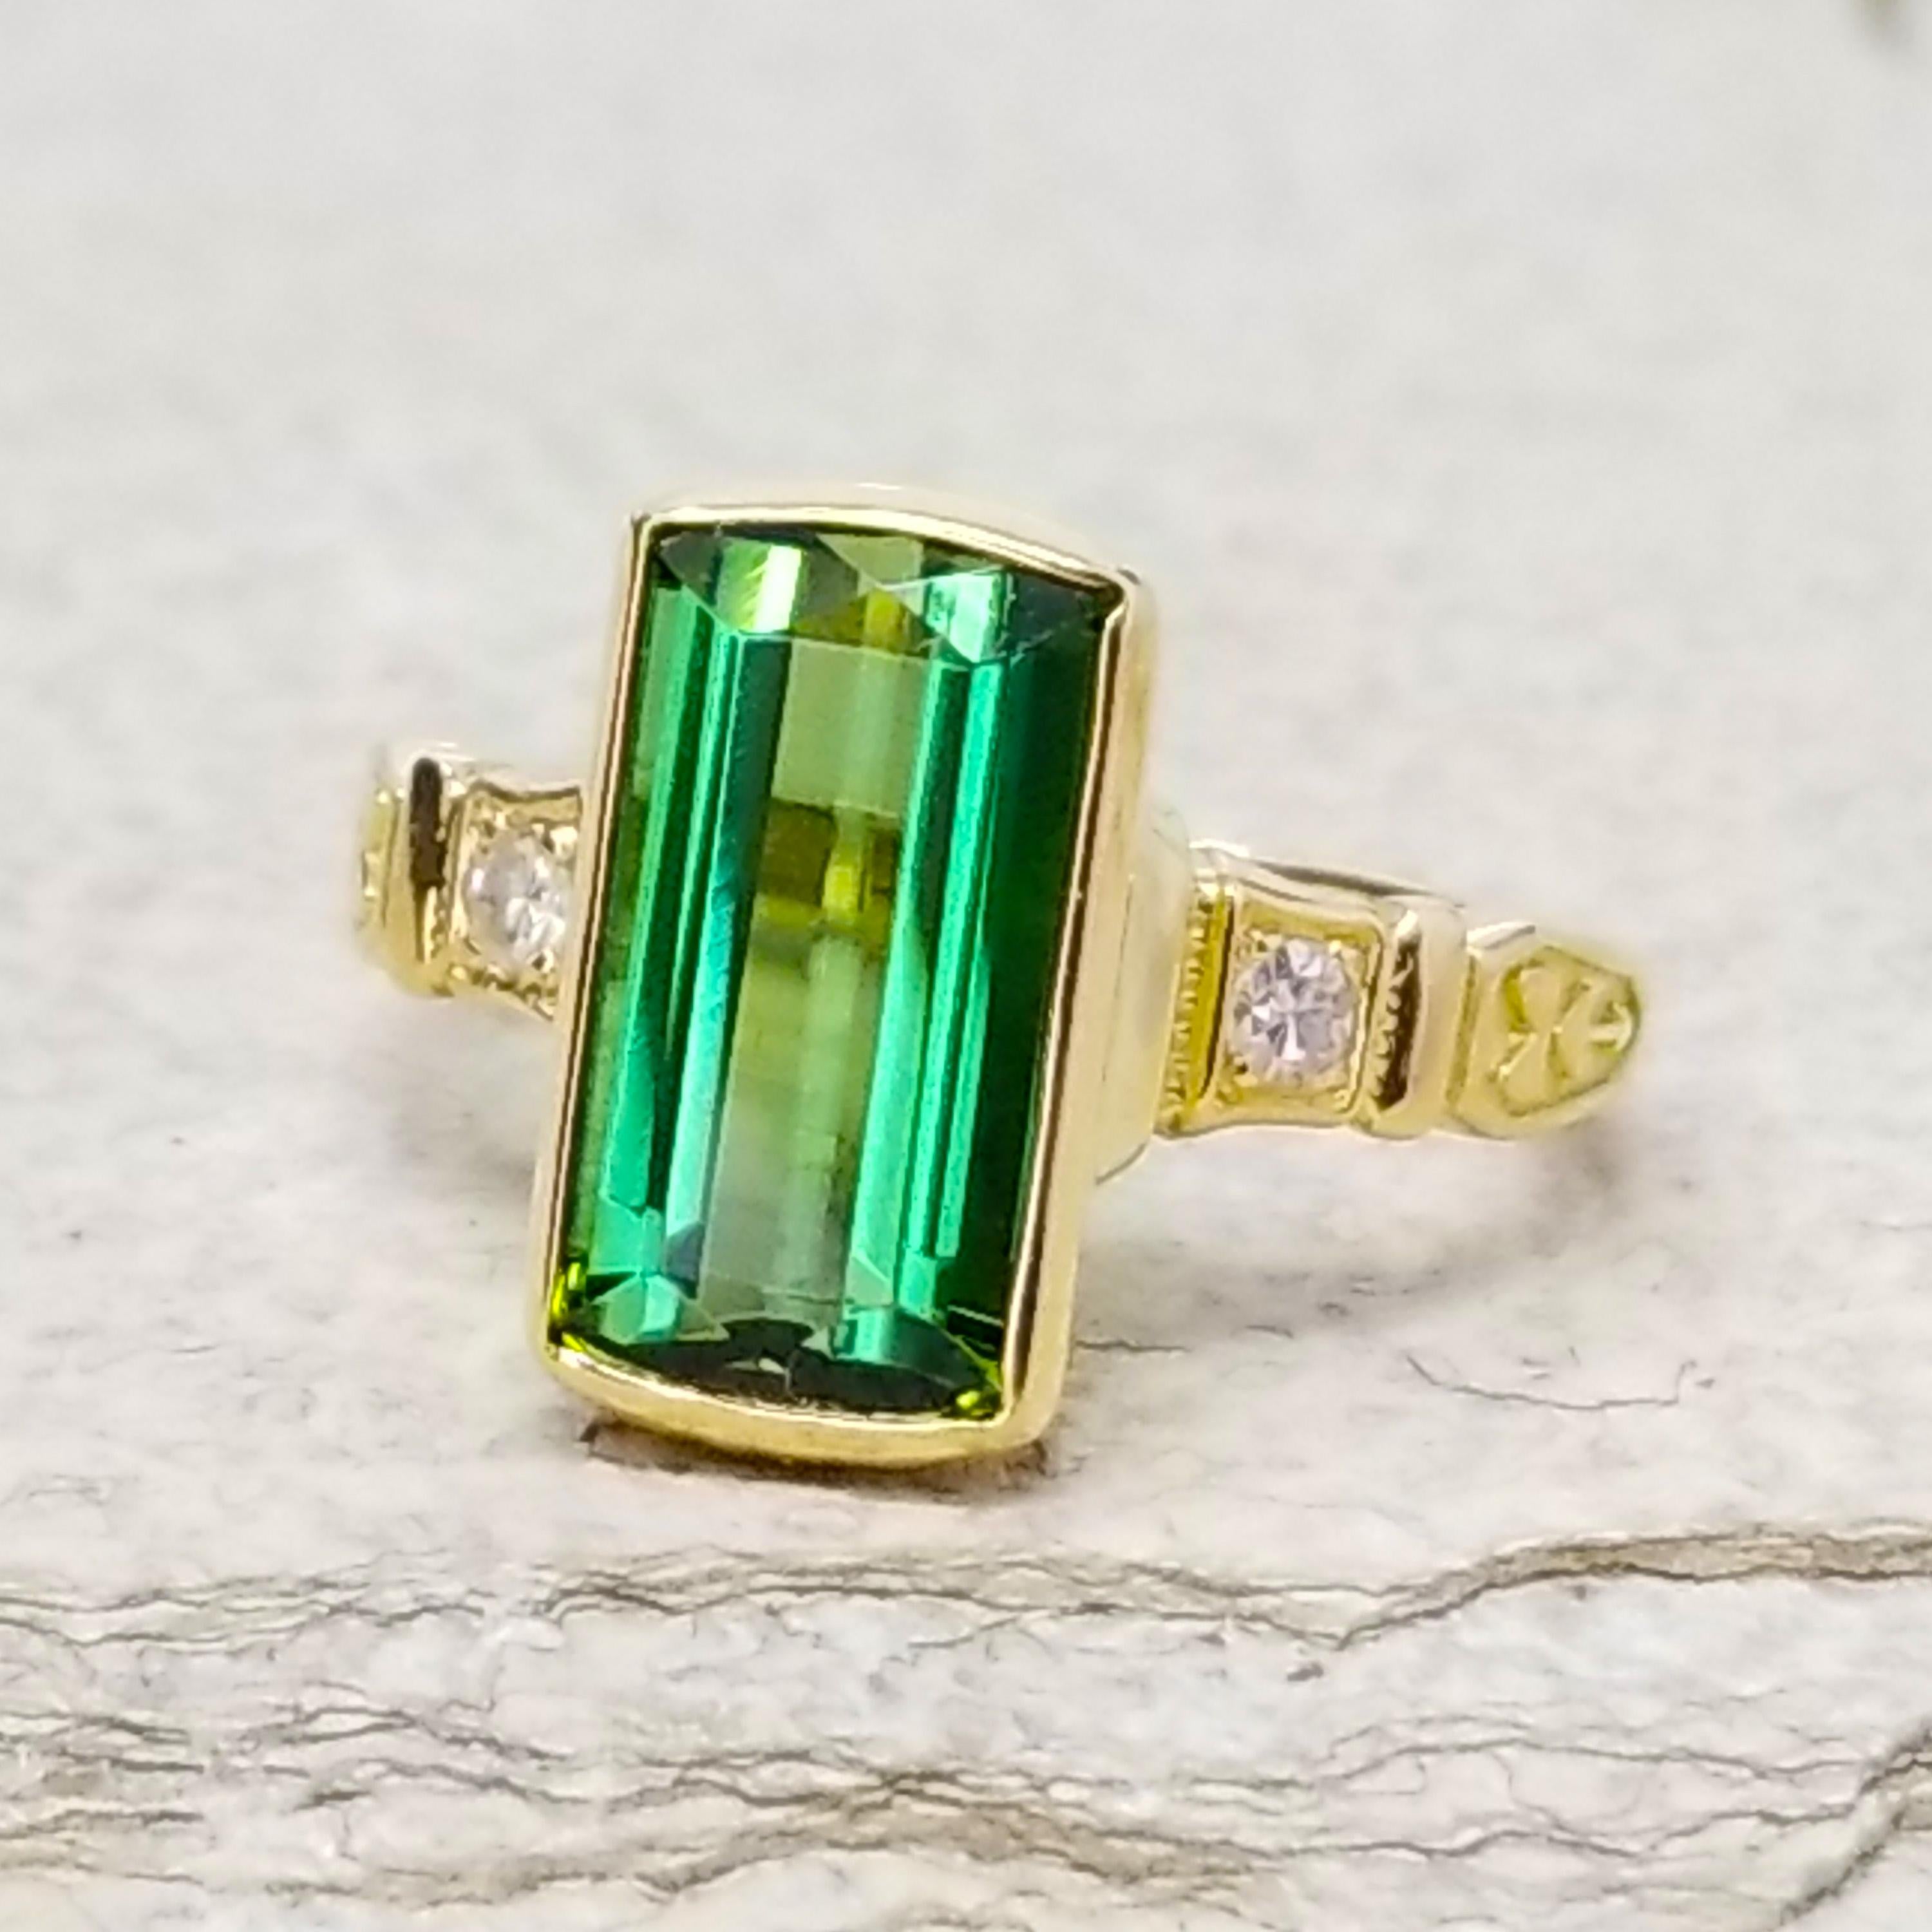 The Ivy Ring blends a distinctly Art Deco motif with a cool and modern setting which showcases a gemstone beautifully. This version features a richly-hued green tourmaline in a unique custom cut; the long bar-shaped facets on the back of the stone